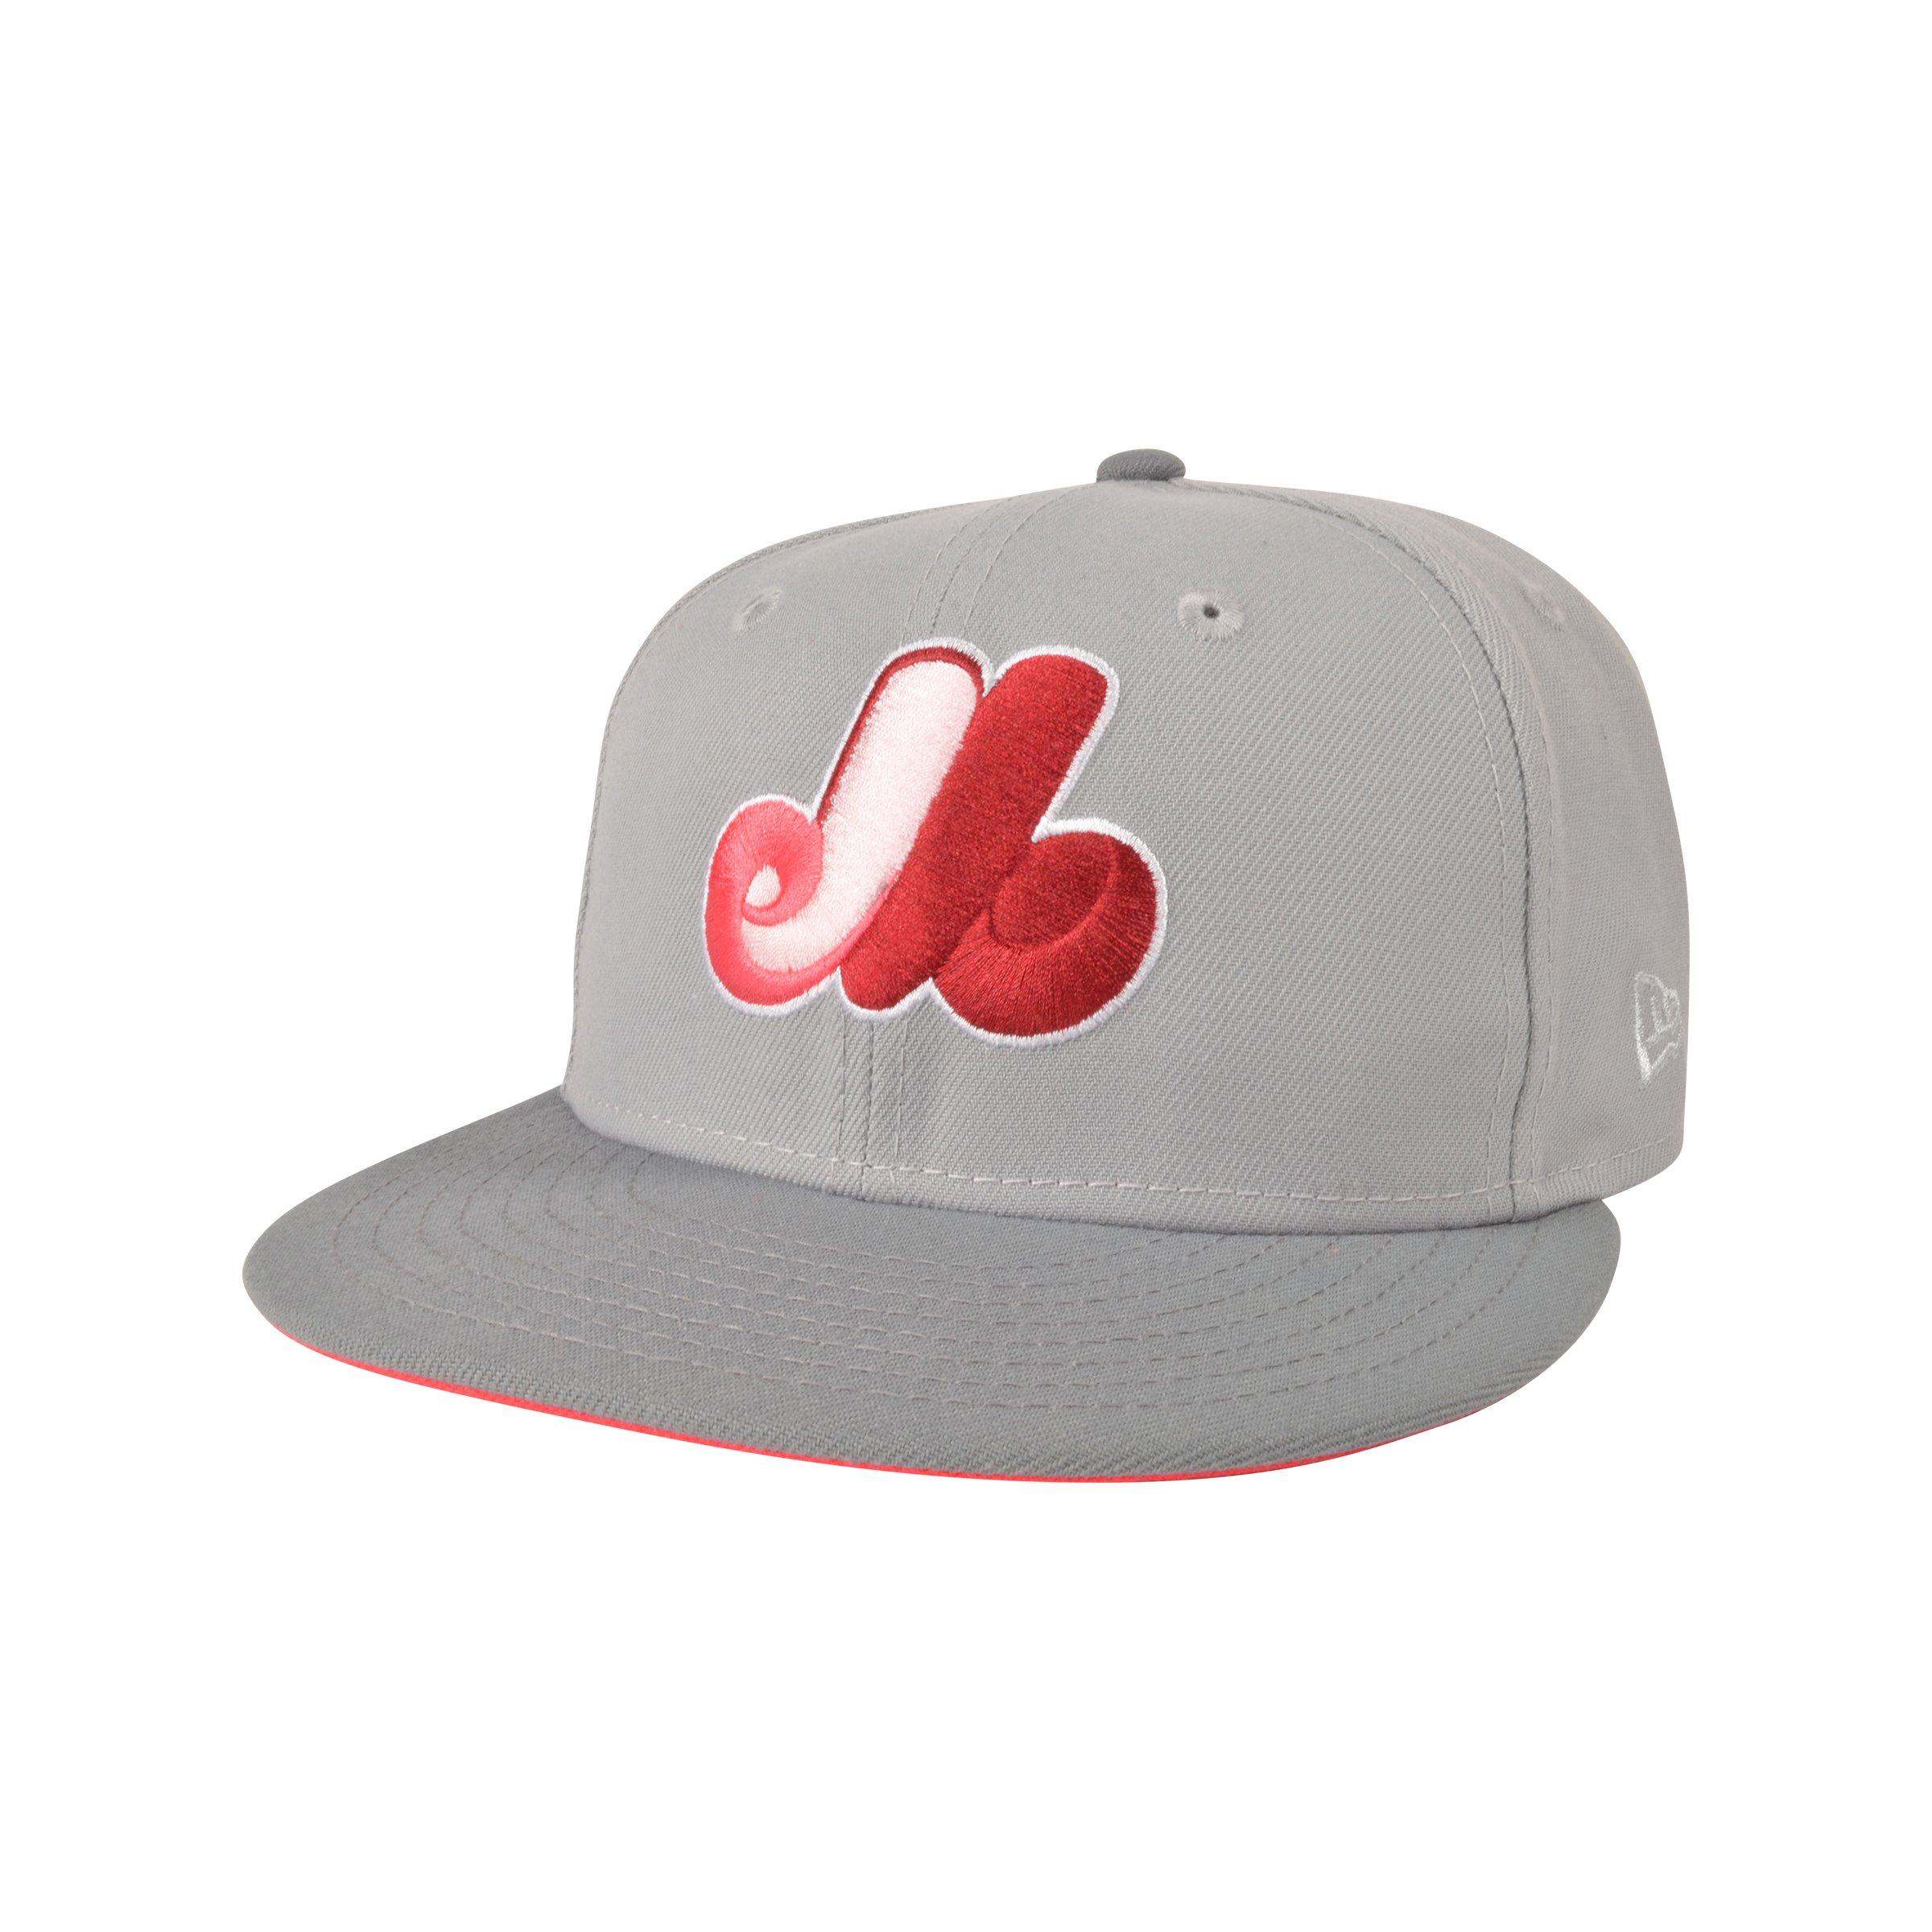 New Era, Accessories, Montreal Expos Cream Fitted Hat